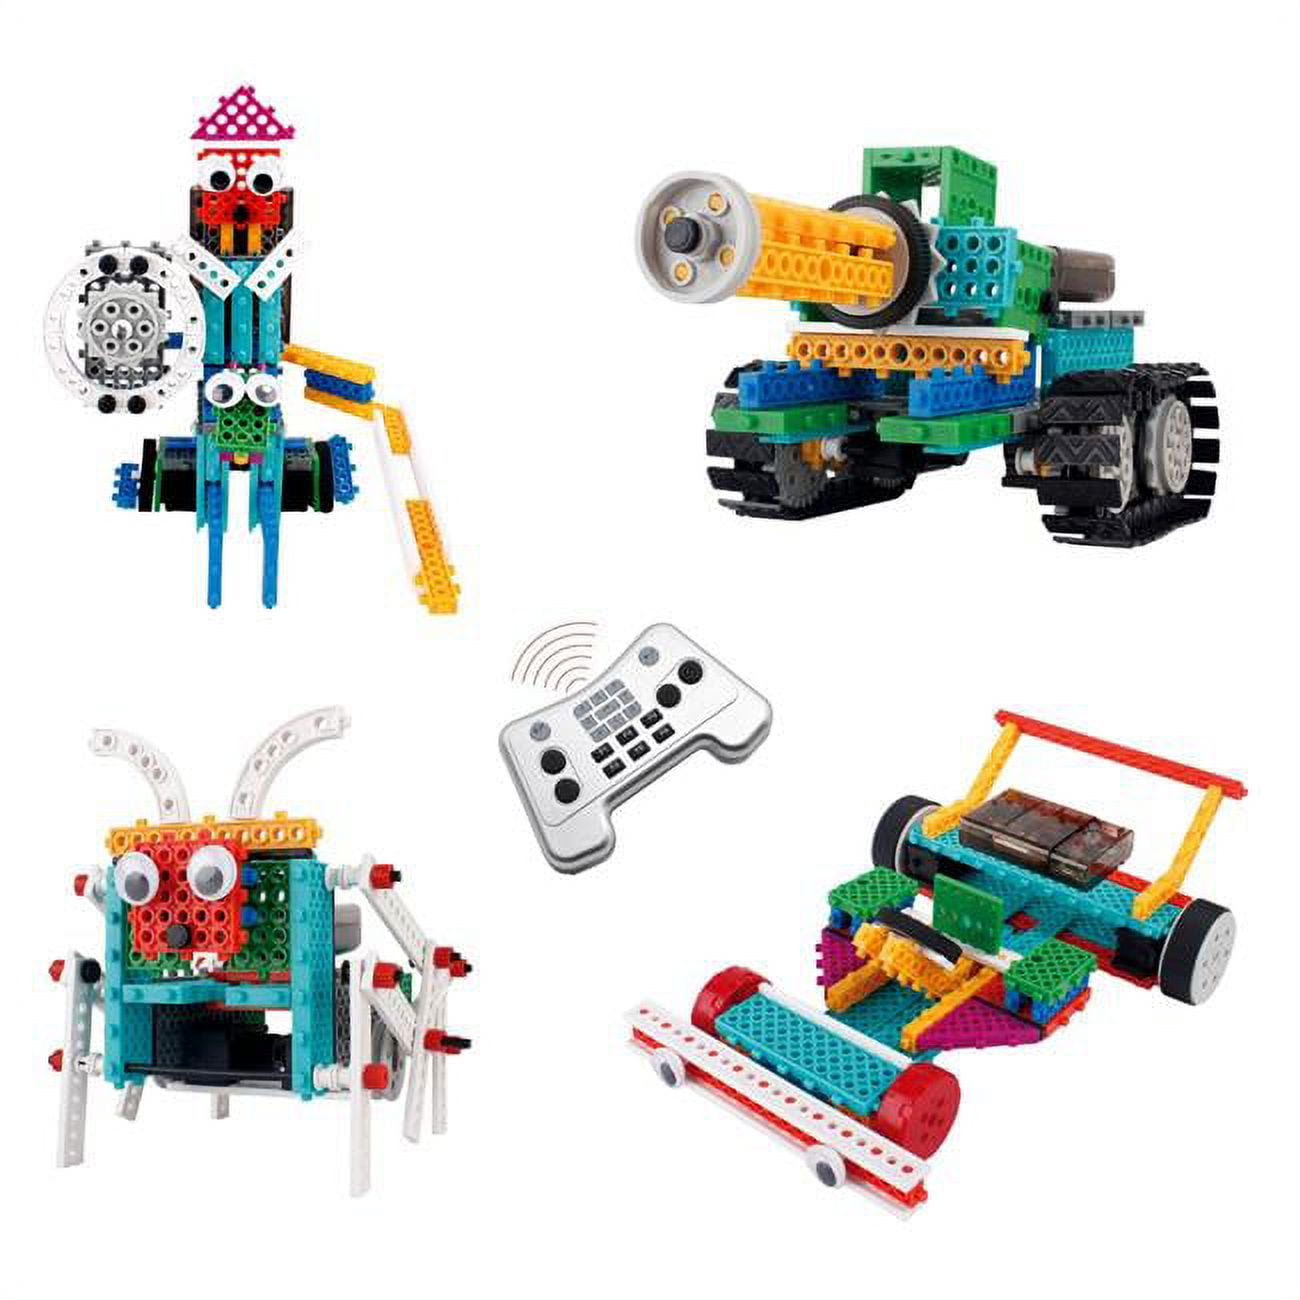 Picture of AZImport PB721 Remote Control Building Kits, Remote Control Machine Educational Learning Robot Kits for Kids Children for Fun - 237 Piece